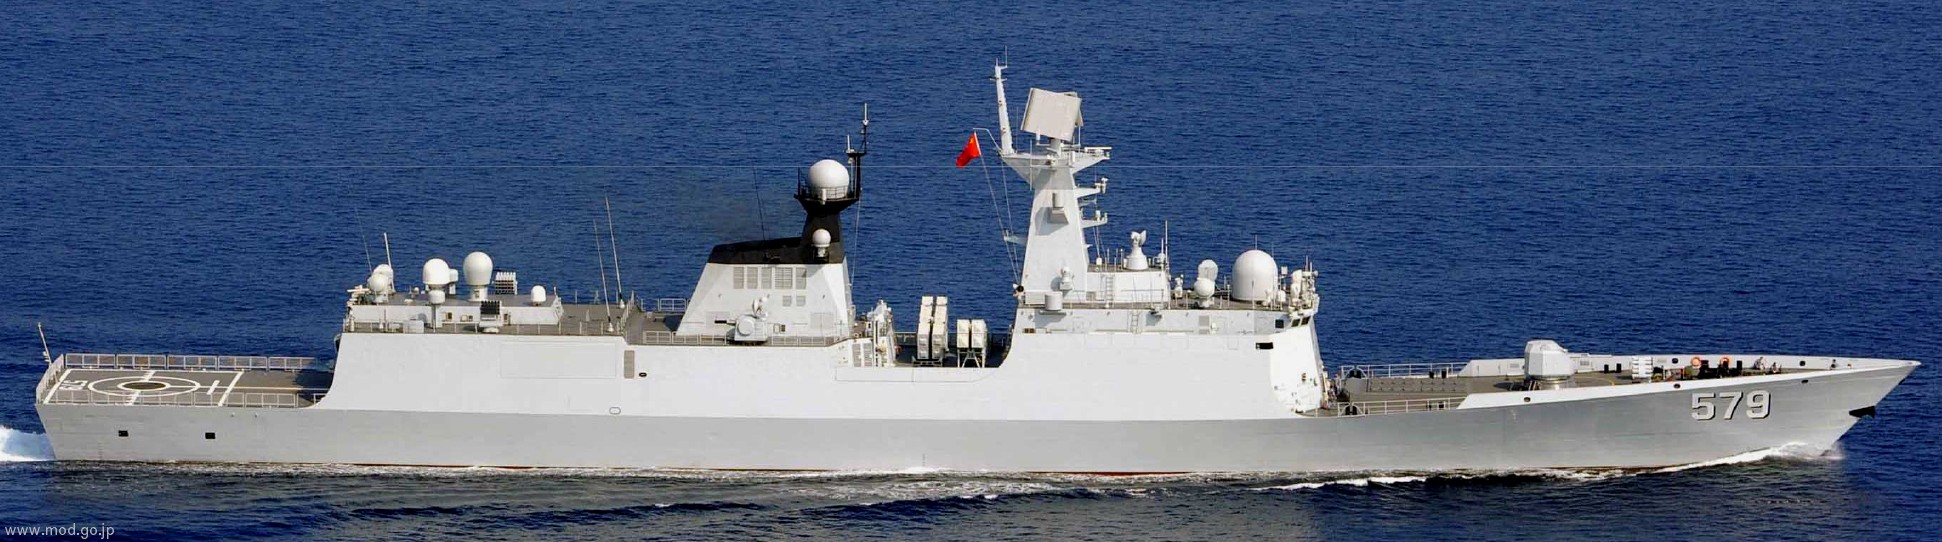 ffg-579 plans handan type 054a jiangkai ii class guided missile frigate china people's liberation army navy 02